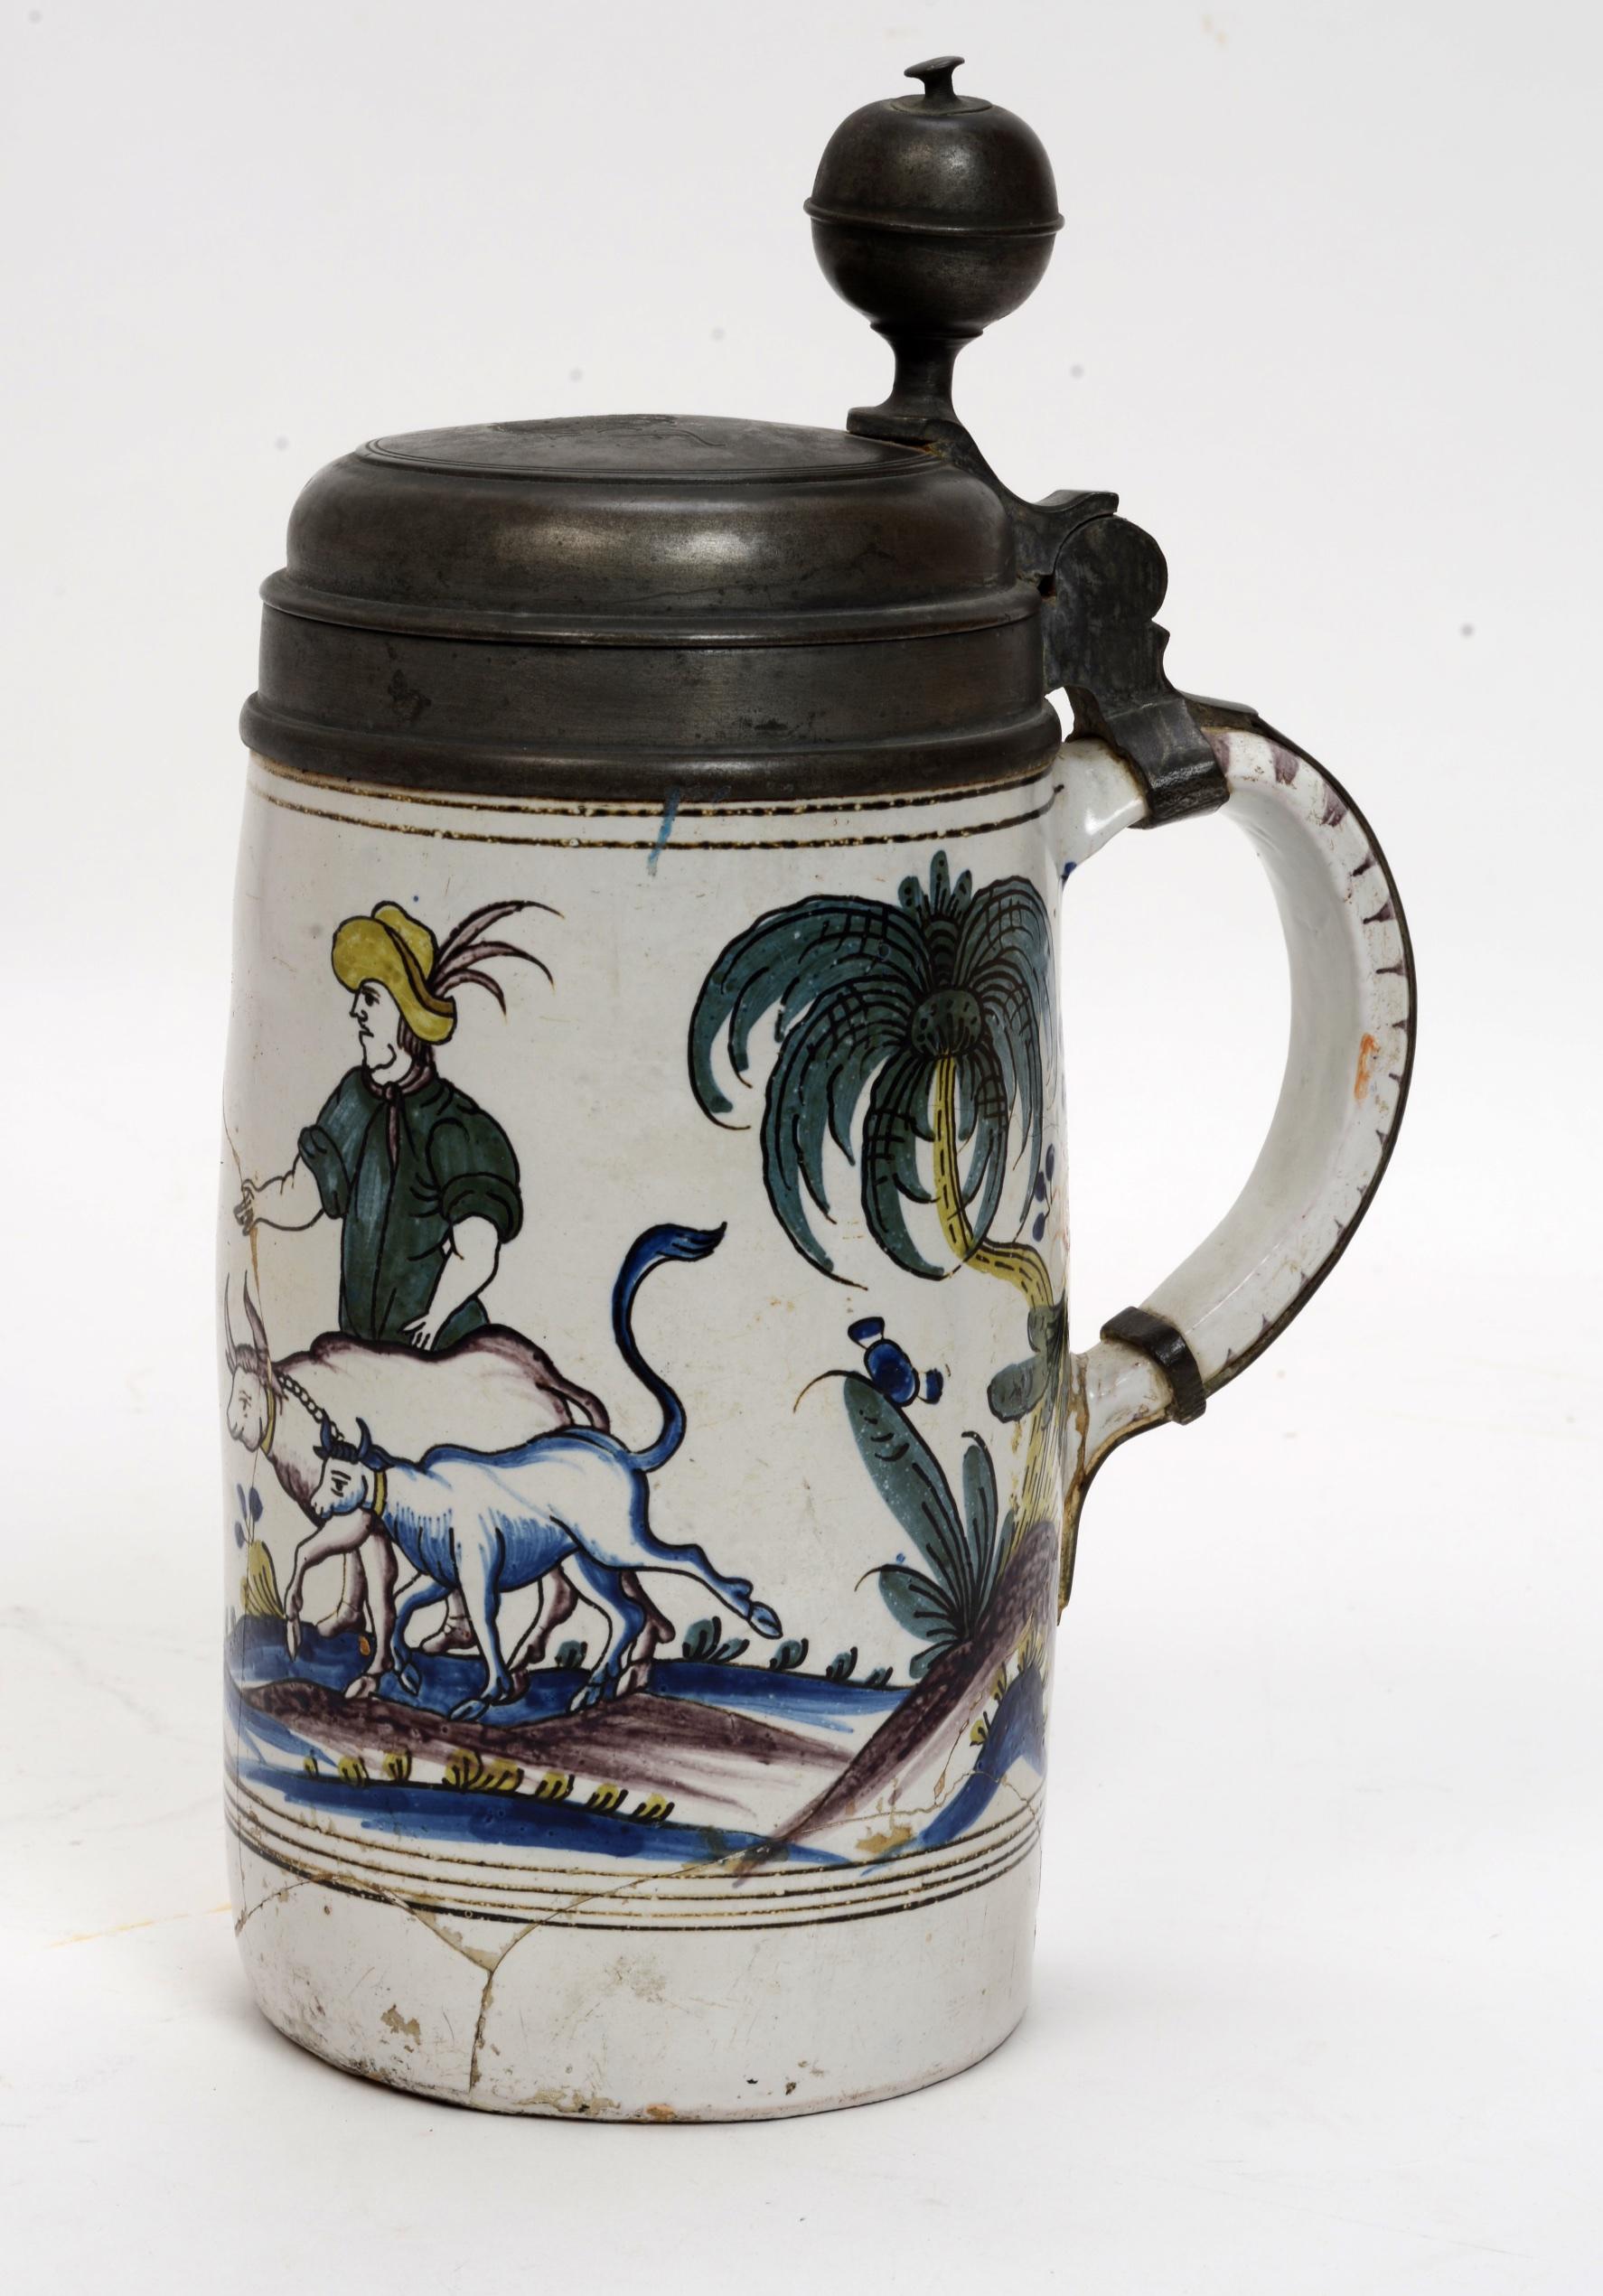 An 18th century German Pewter Mounted Faience Stein dated 1794 with Touchmarks 